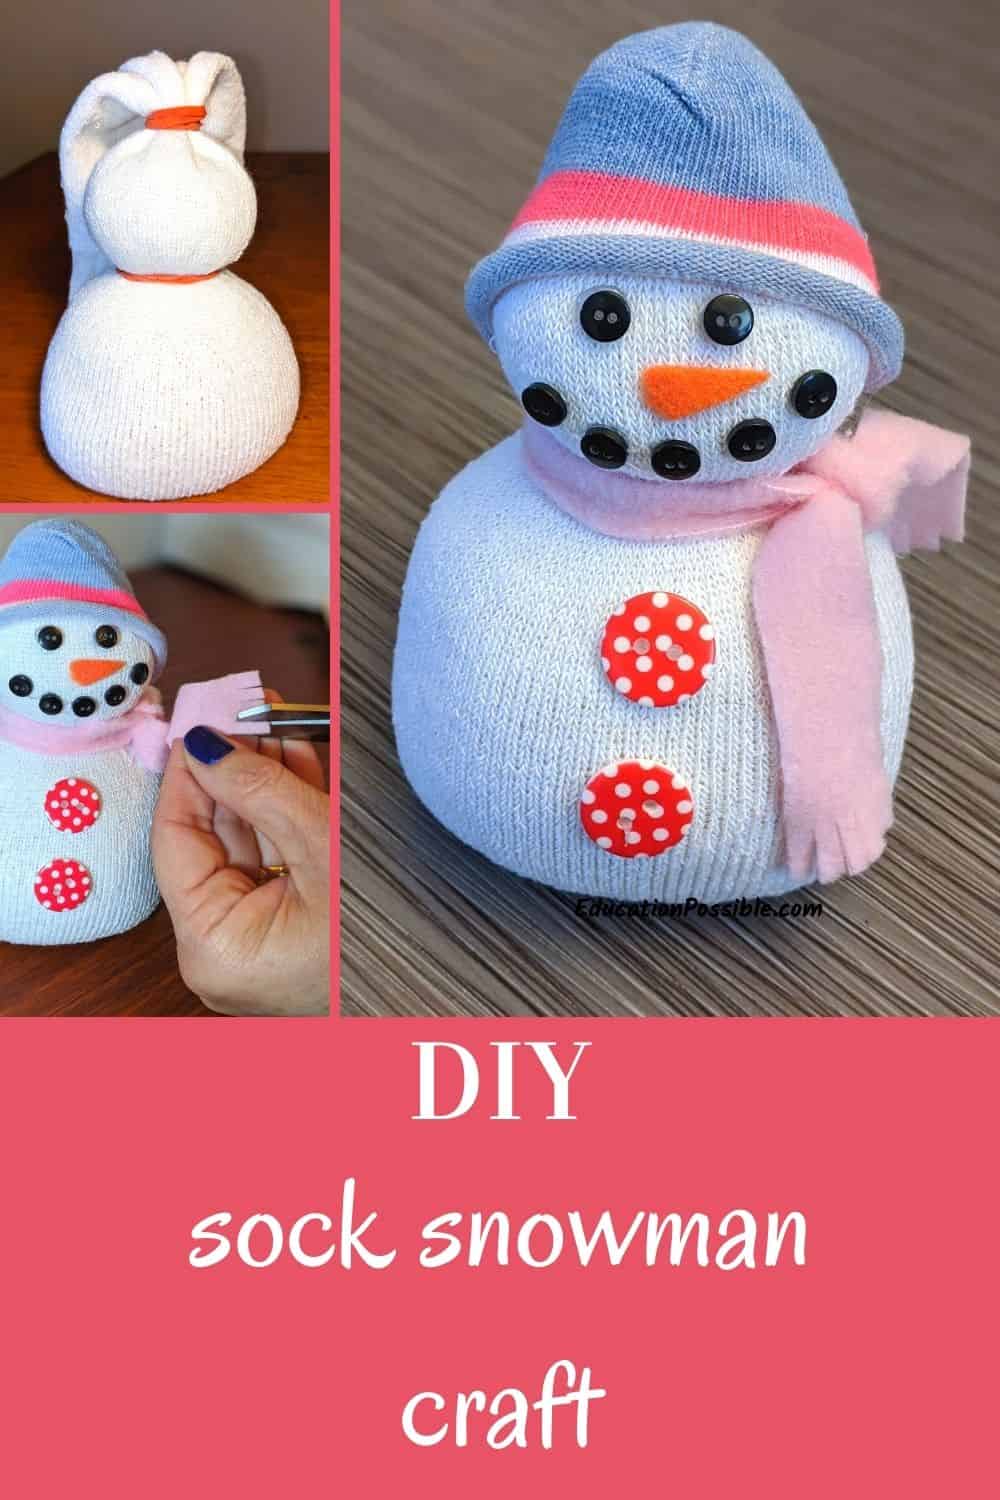 Collage of 3 images for the making of a sock snowman craft.